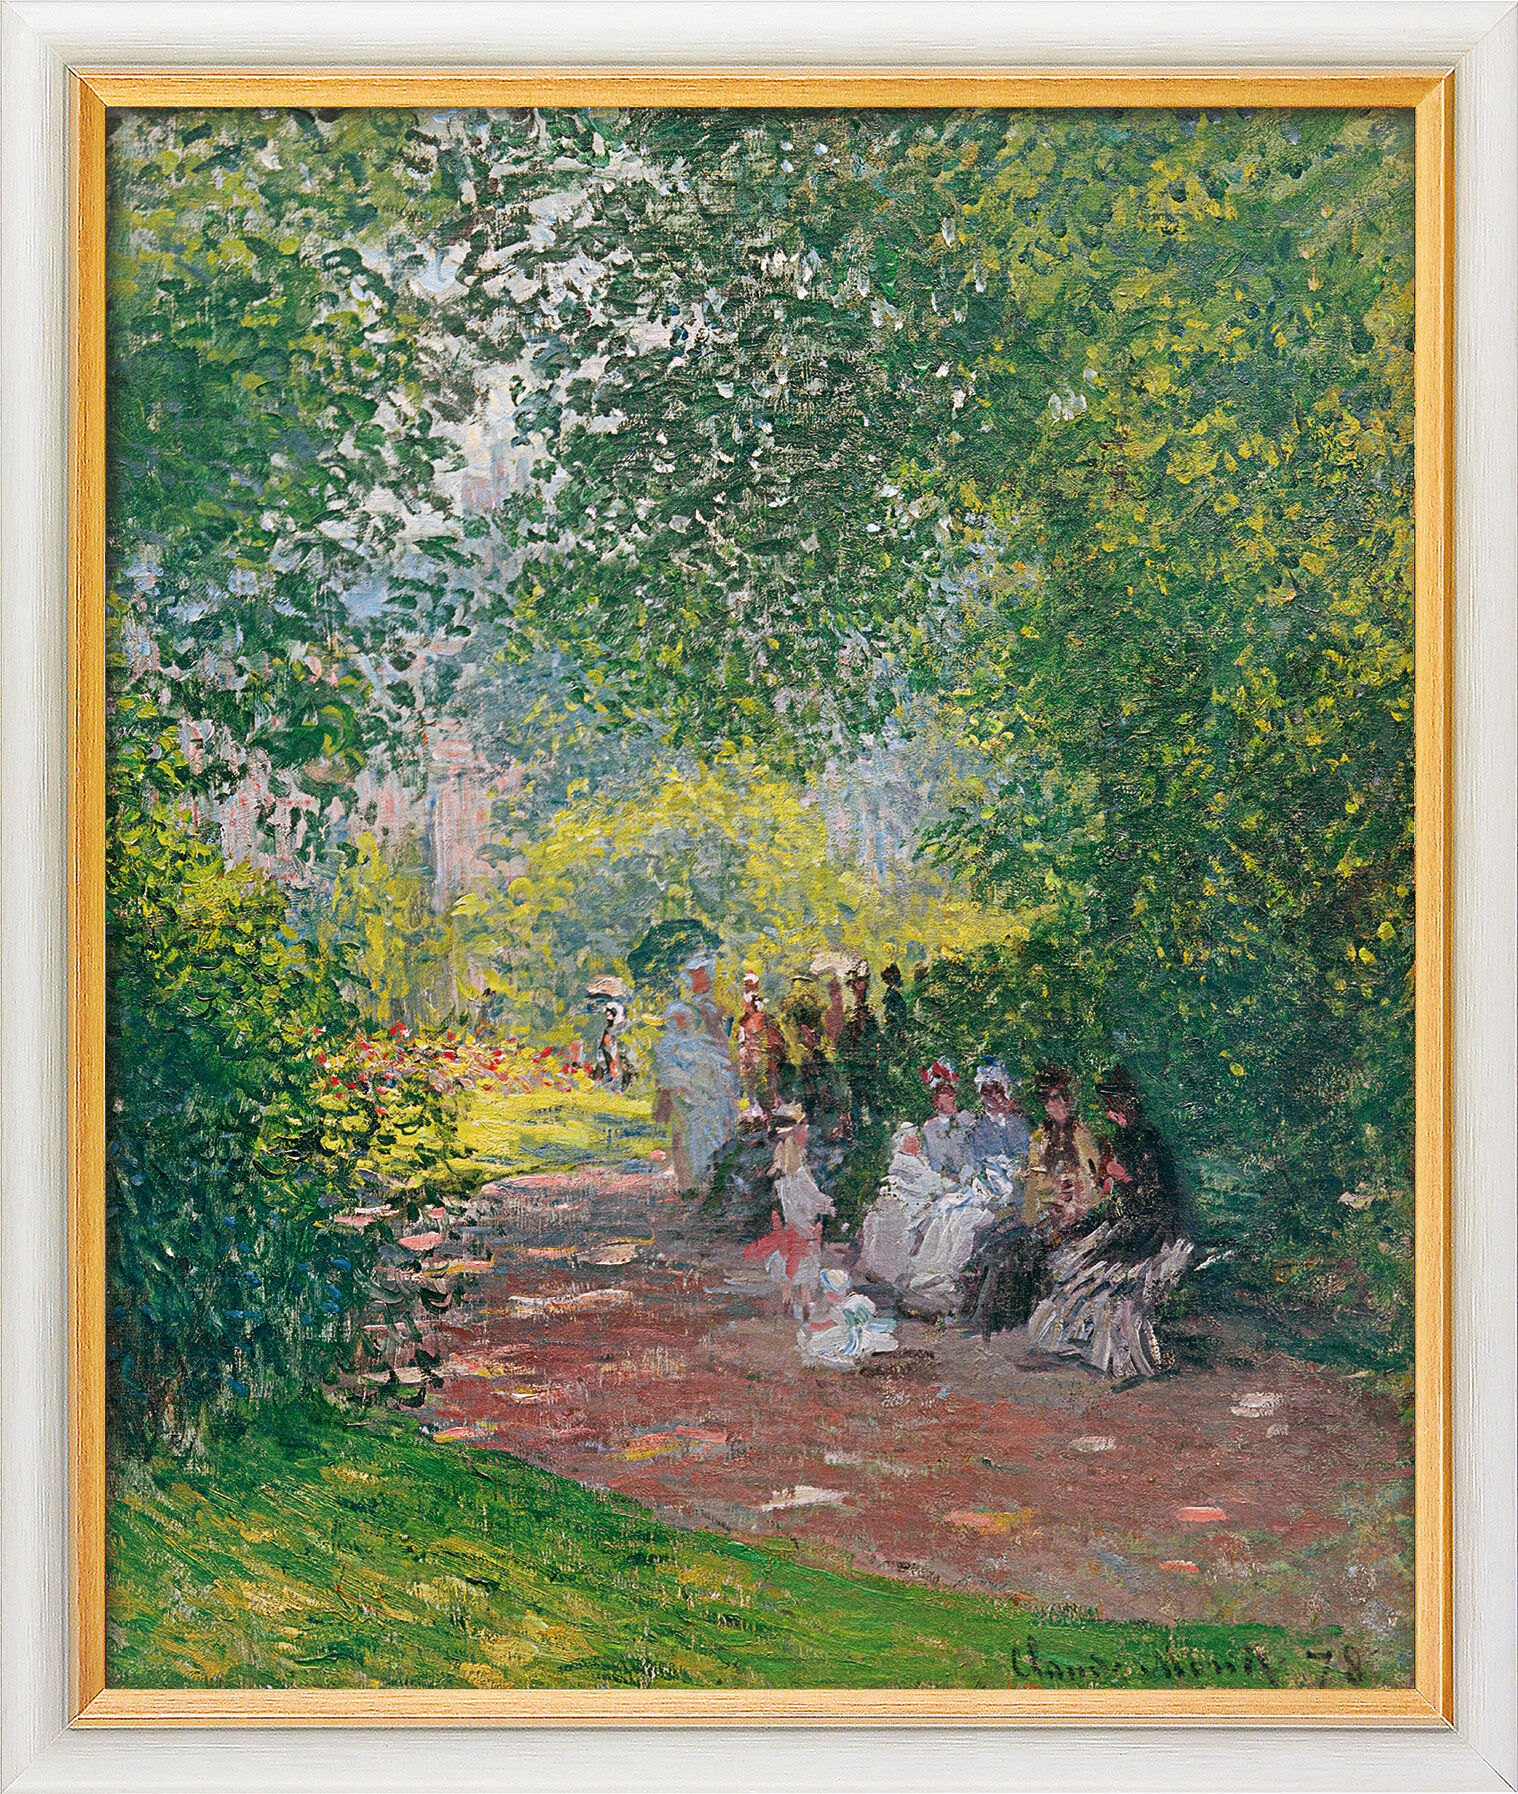 Picture "In the Park Monceau" (1878), framed by Claude Monet